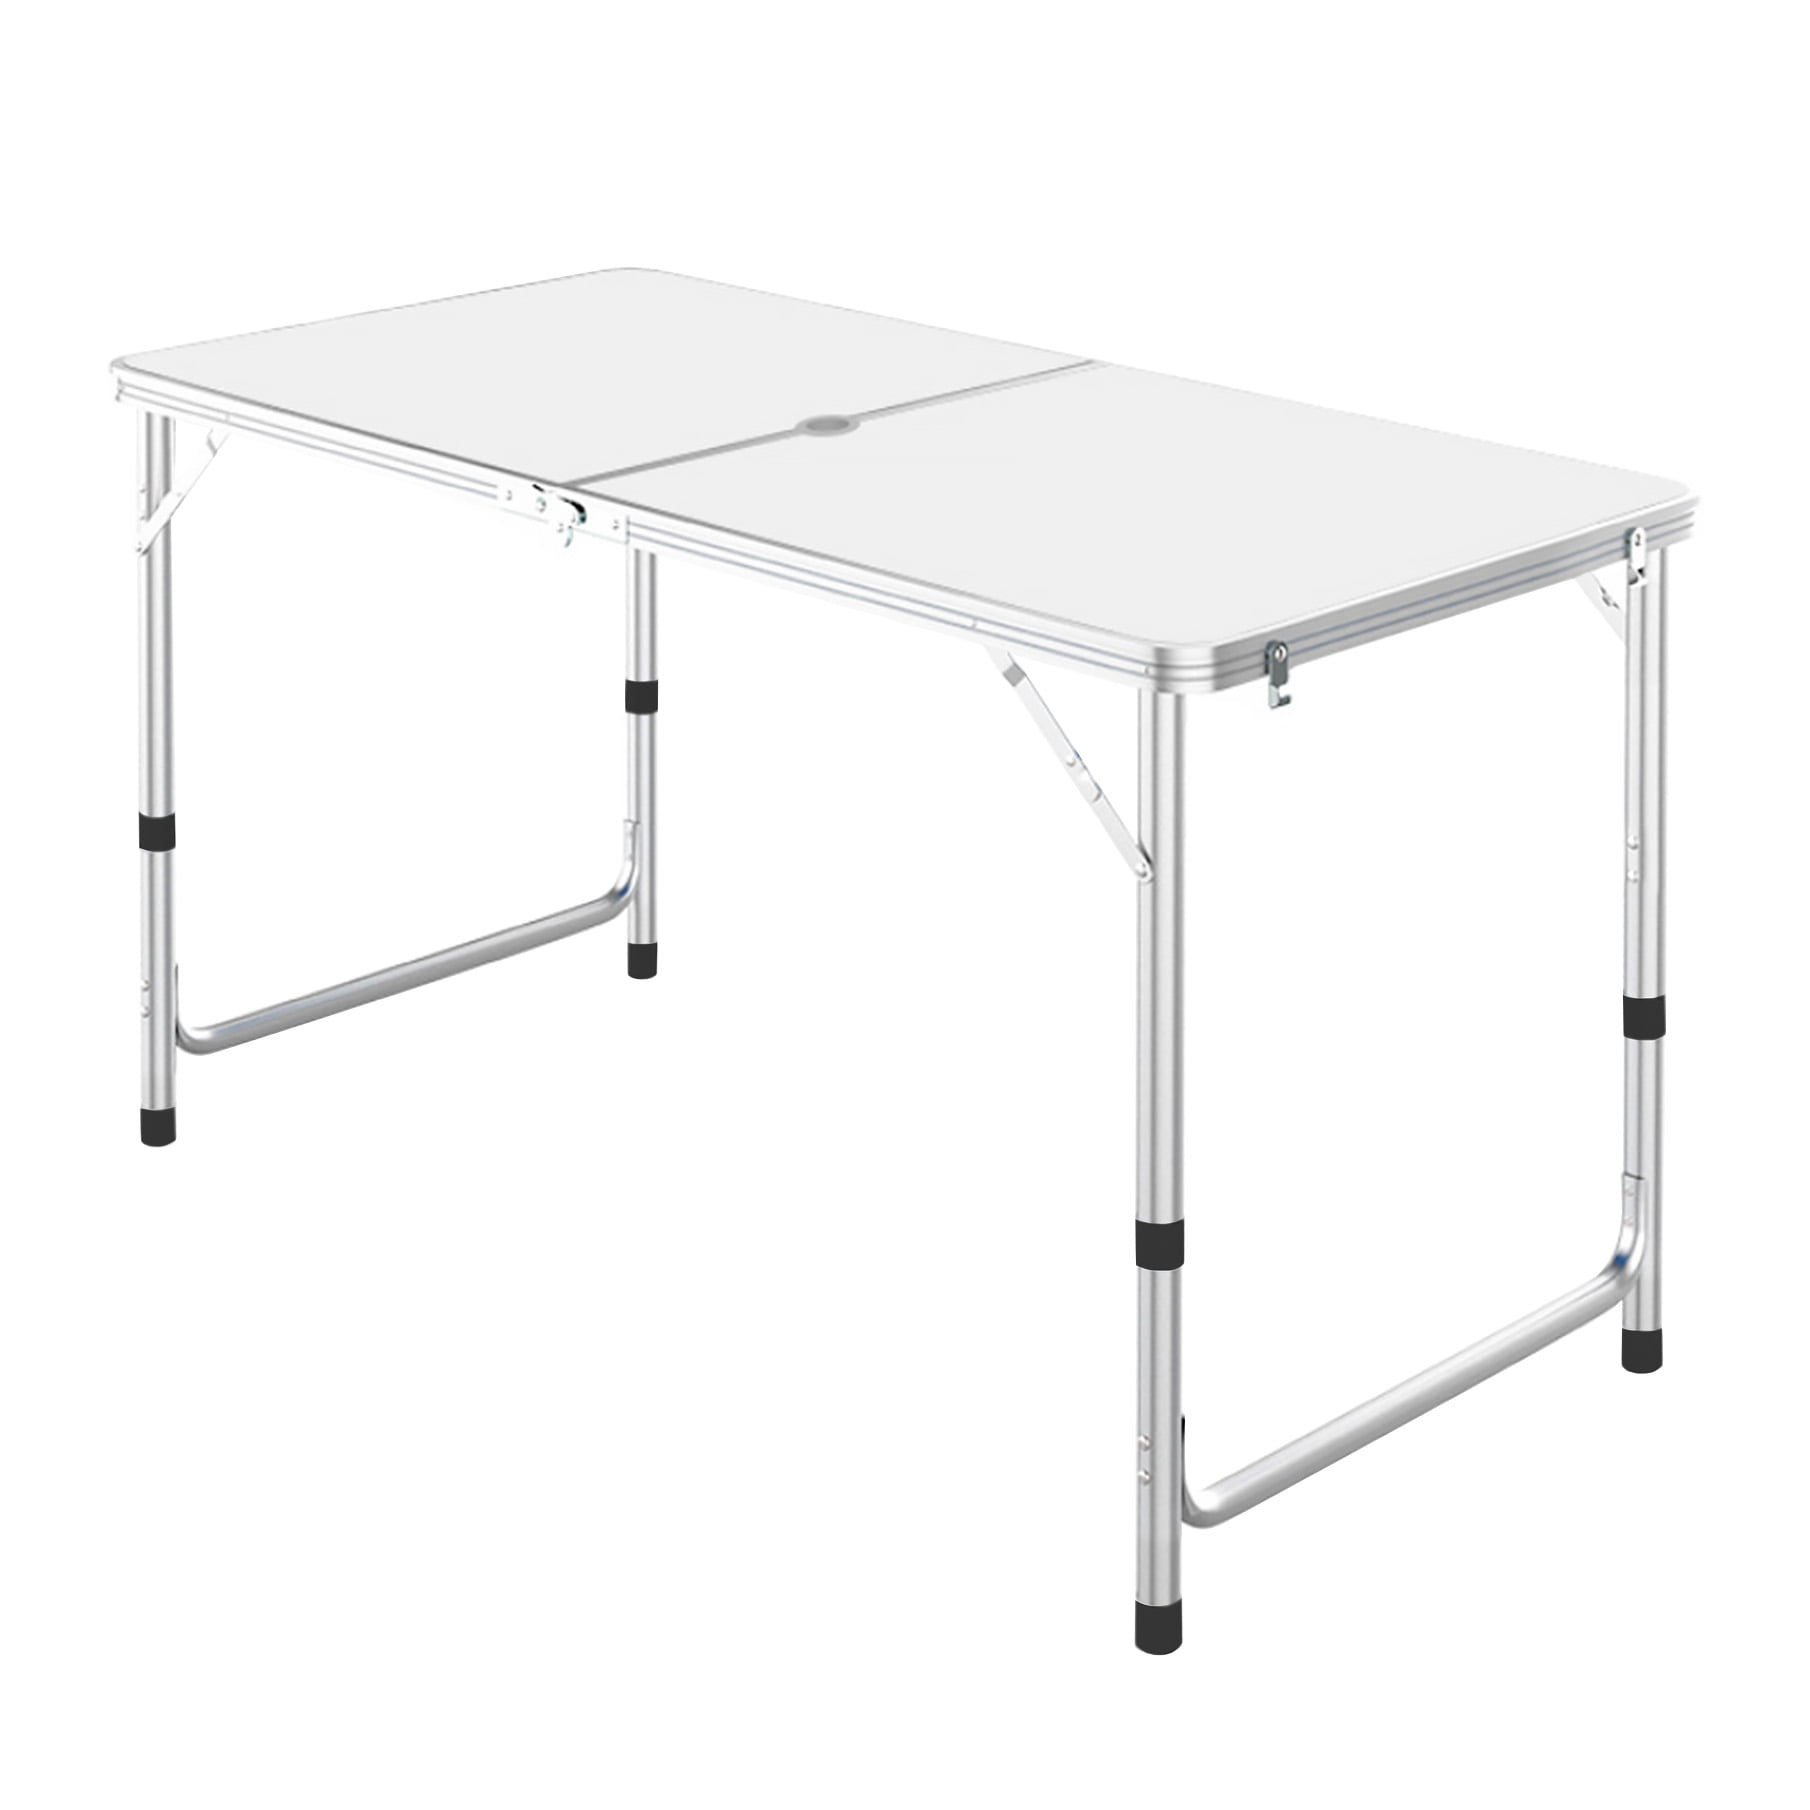 Details about   6FT Folding Table Aluminium Indoor Outdoor Picnic Party Camping Portable Desk US 